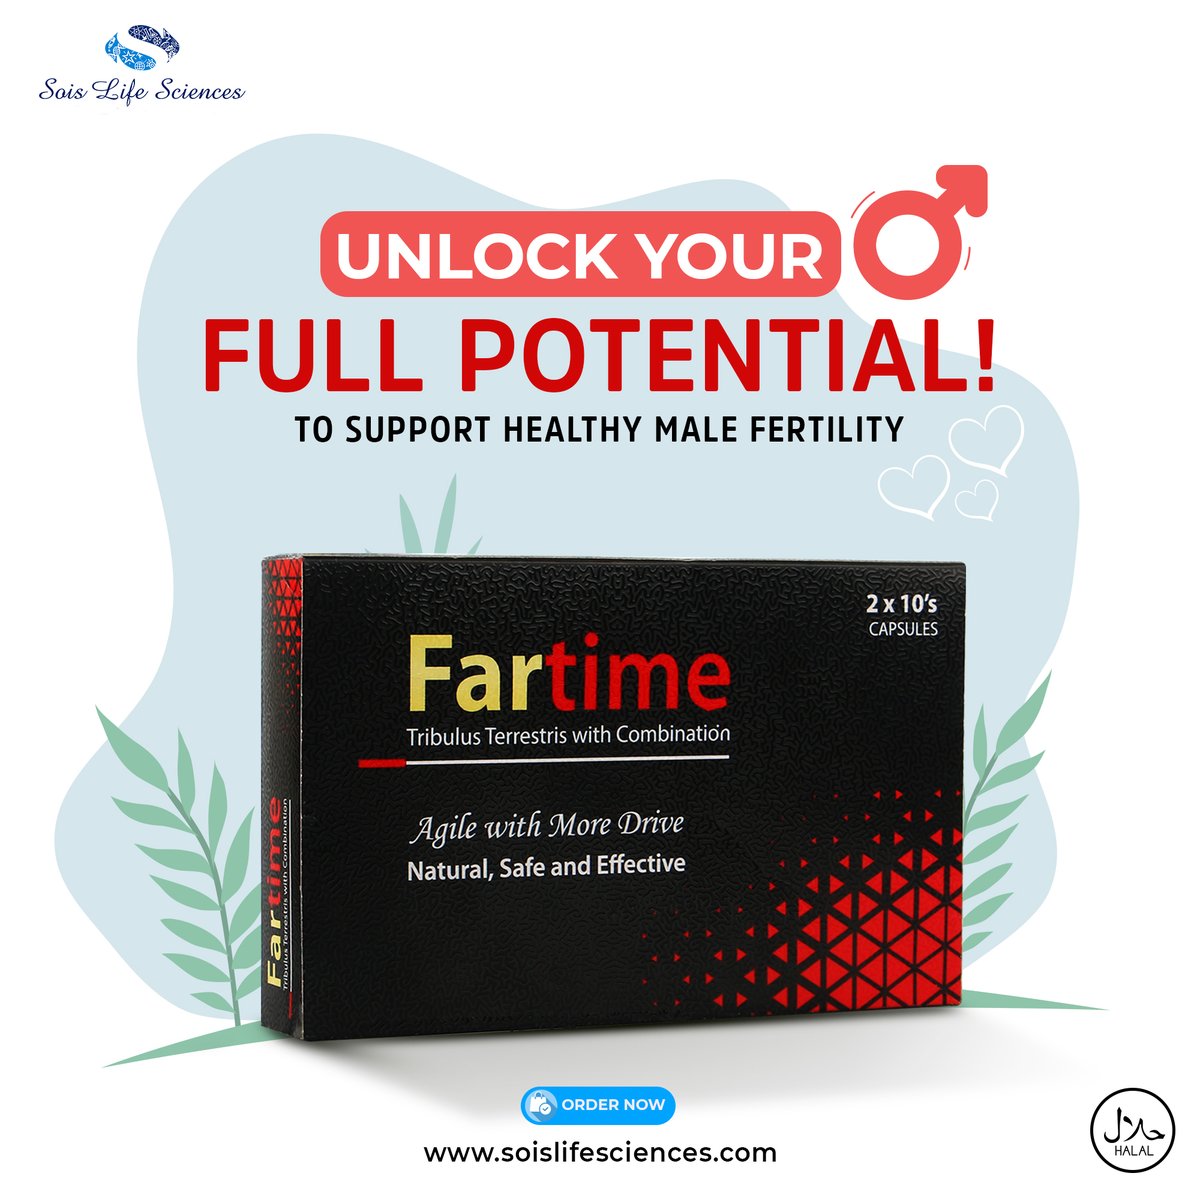 Boost men's fertility performance with our groundbreaking solution. Don't wait, take charge of your fertility today!

Order Online: soislifesciences.com

#MenFertilityBoost #UnlockYourPotential #JourneyToFatherhood #BuildingAFuture #TakeCharge